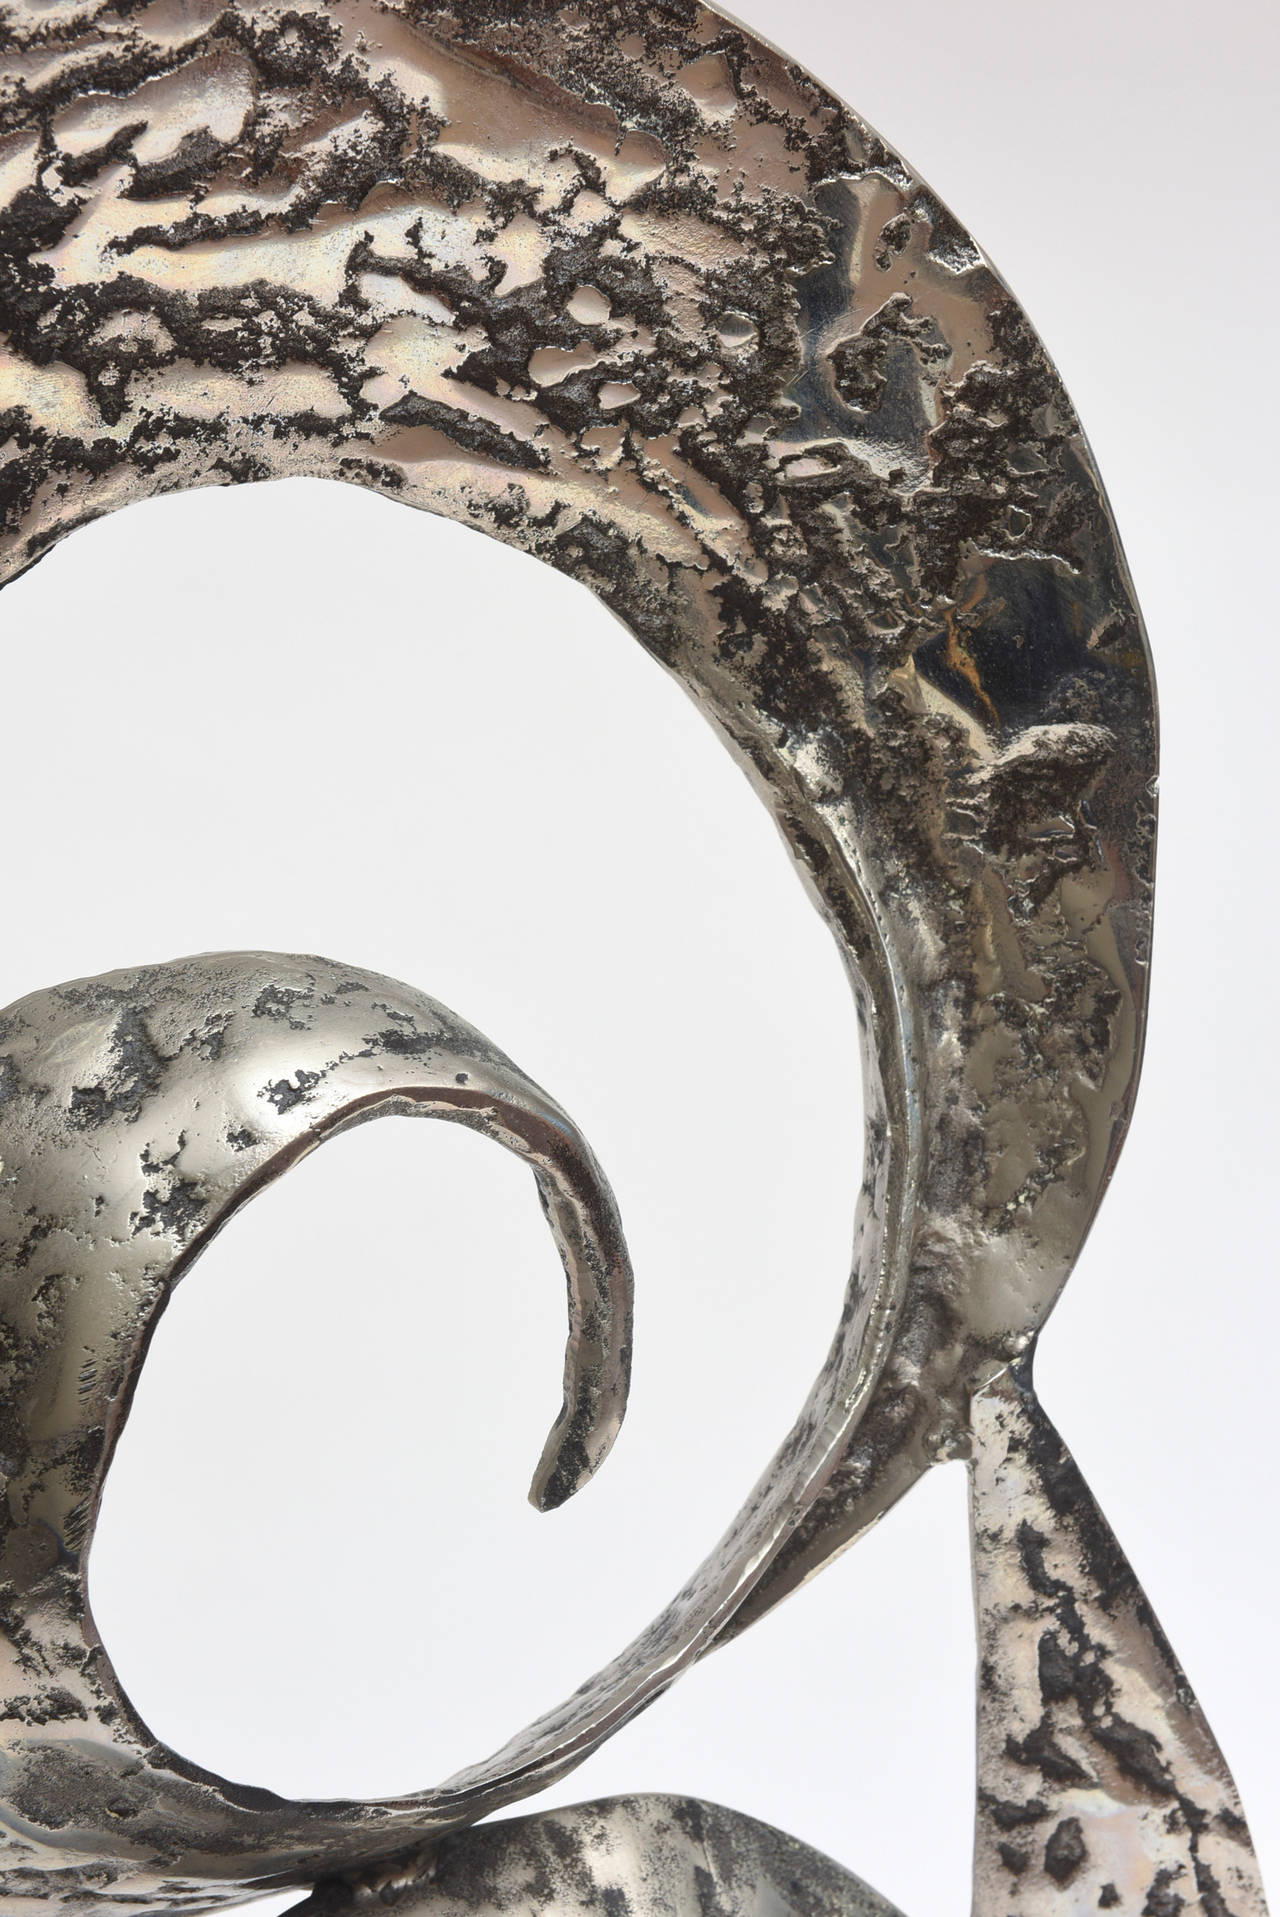 This Dual spiral abstract sculpture is hand-hammered aluminum with a black painted wash over it. In some ways it has a Brutalist feeling to it. It sits on a black marble base and is unsigned. It is handwrought and has texture and dimension... it is